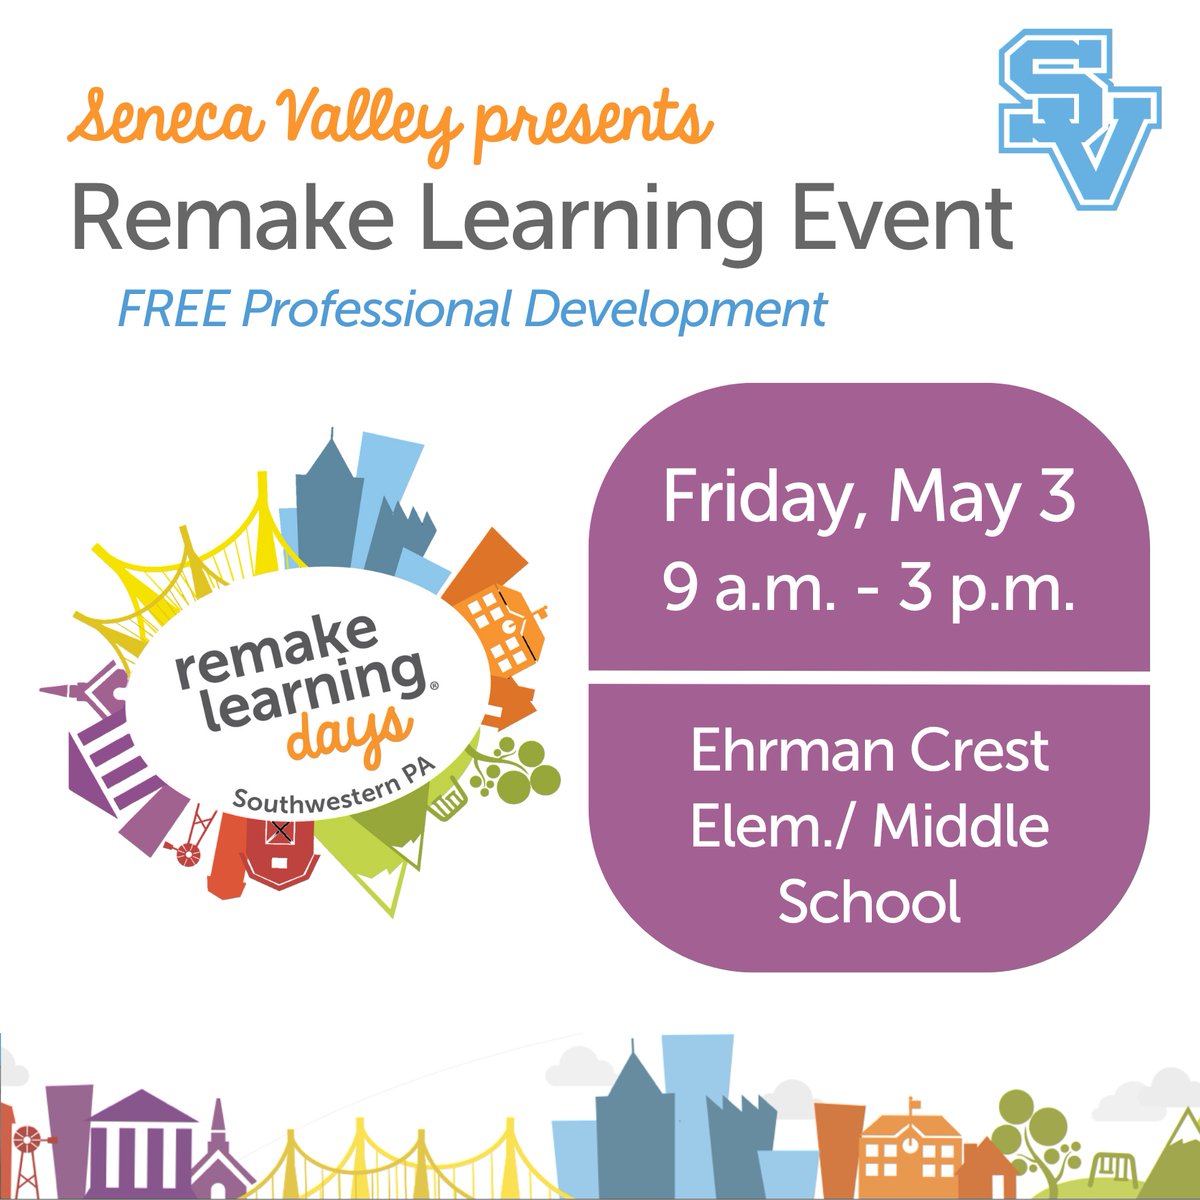 Seneca Valley School District will host a Remake Learning event from 9 a.m. – 3 p.m. on Friday, May 3, at Ehrman Crest Elementary/Middle School (a TIME 2022 “Best Invention”). This engaging and comprehensive professional development event is tailored for K-12 administrators,…